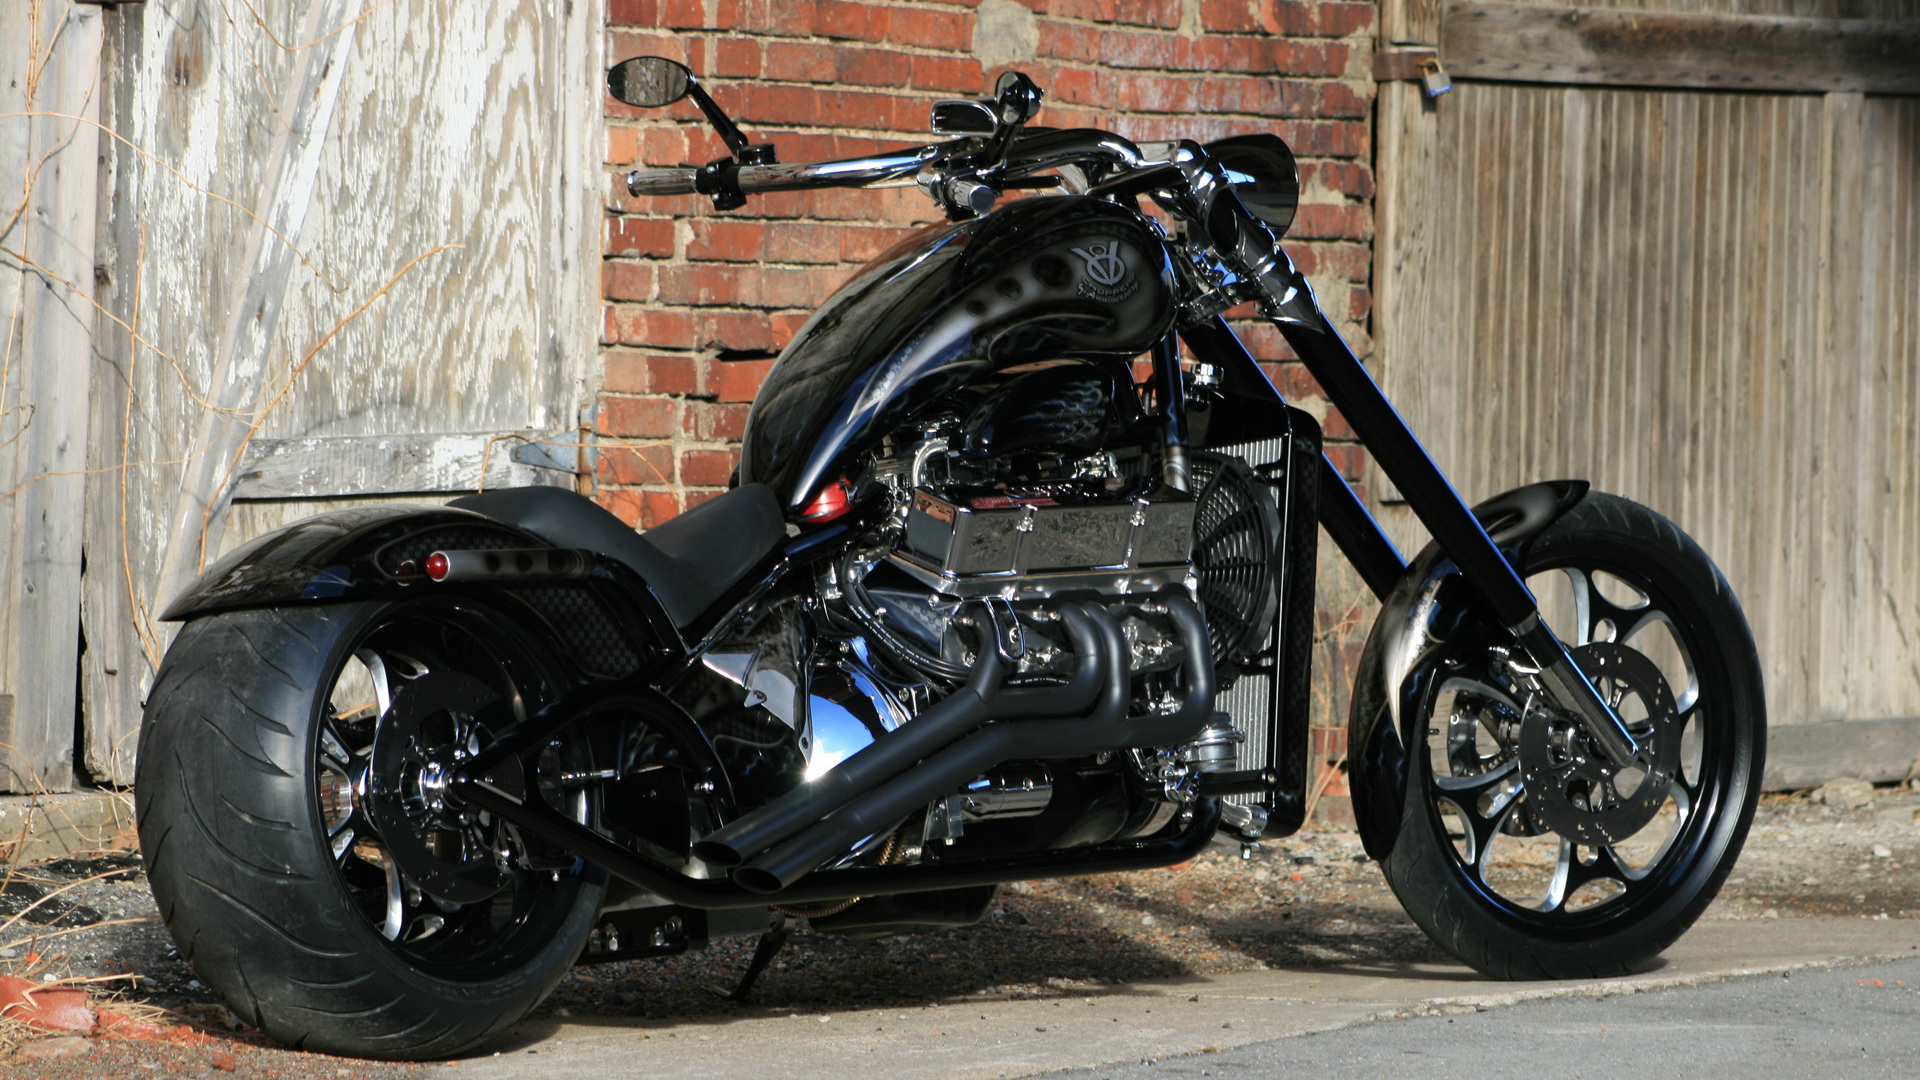 V-8 Choppers Chevy V-8-powered motorcycle -- image via Serious Wheels